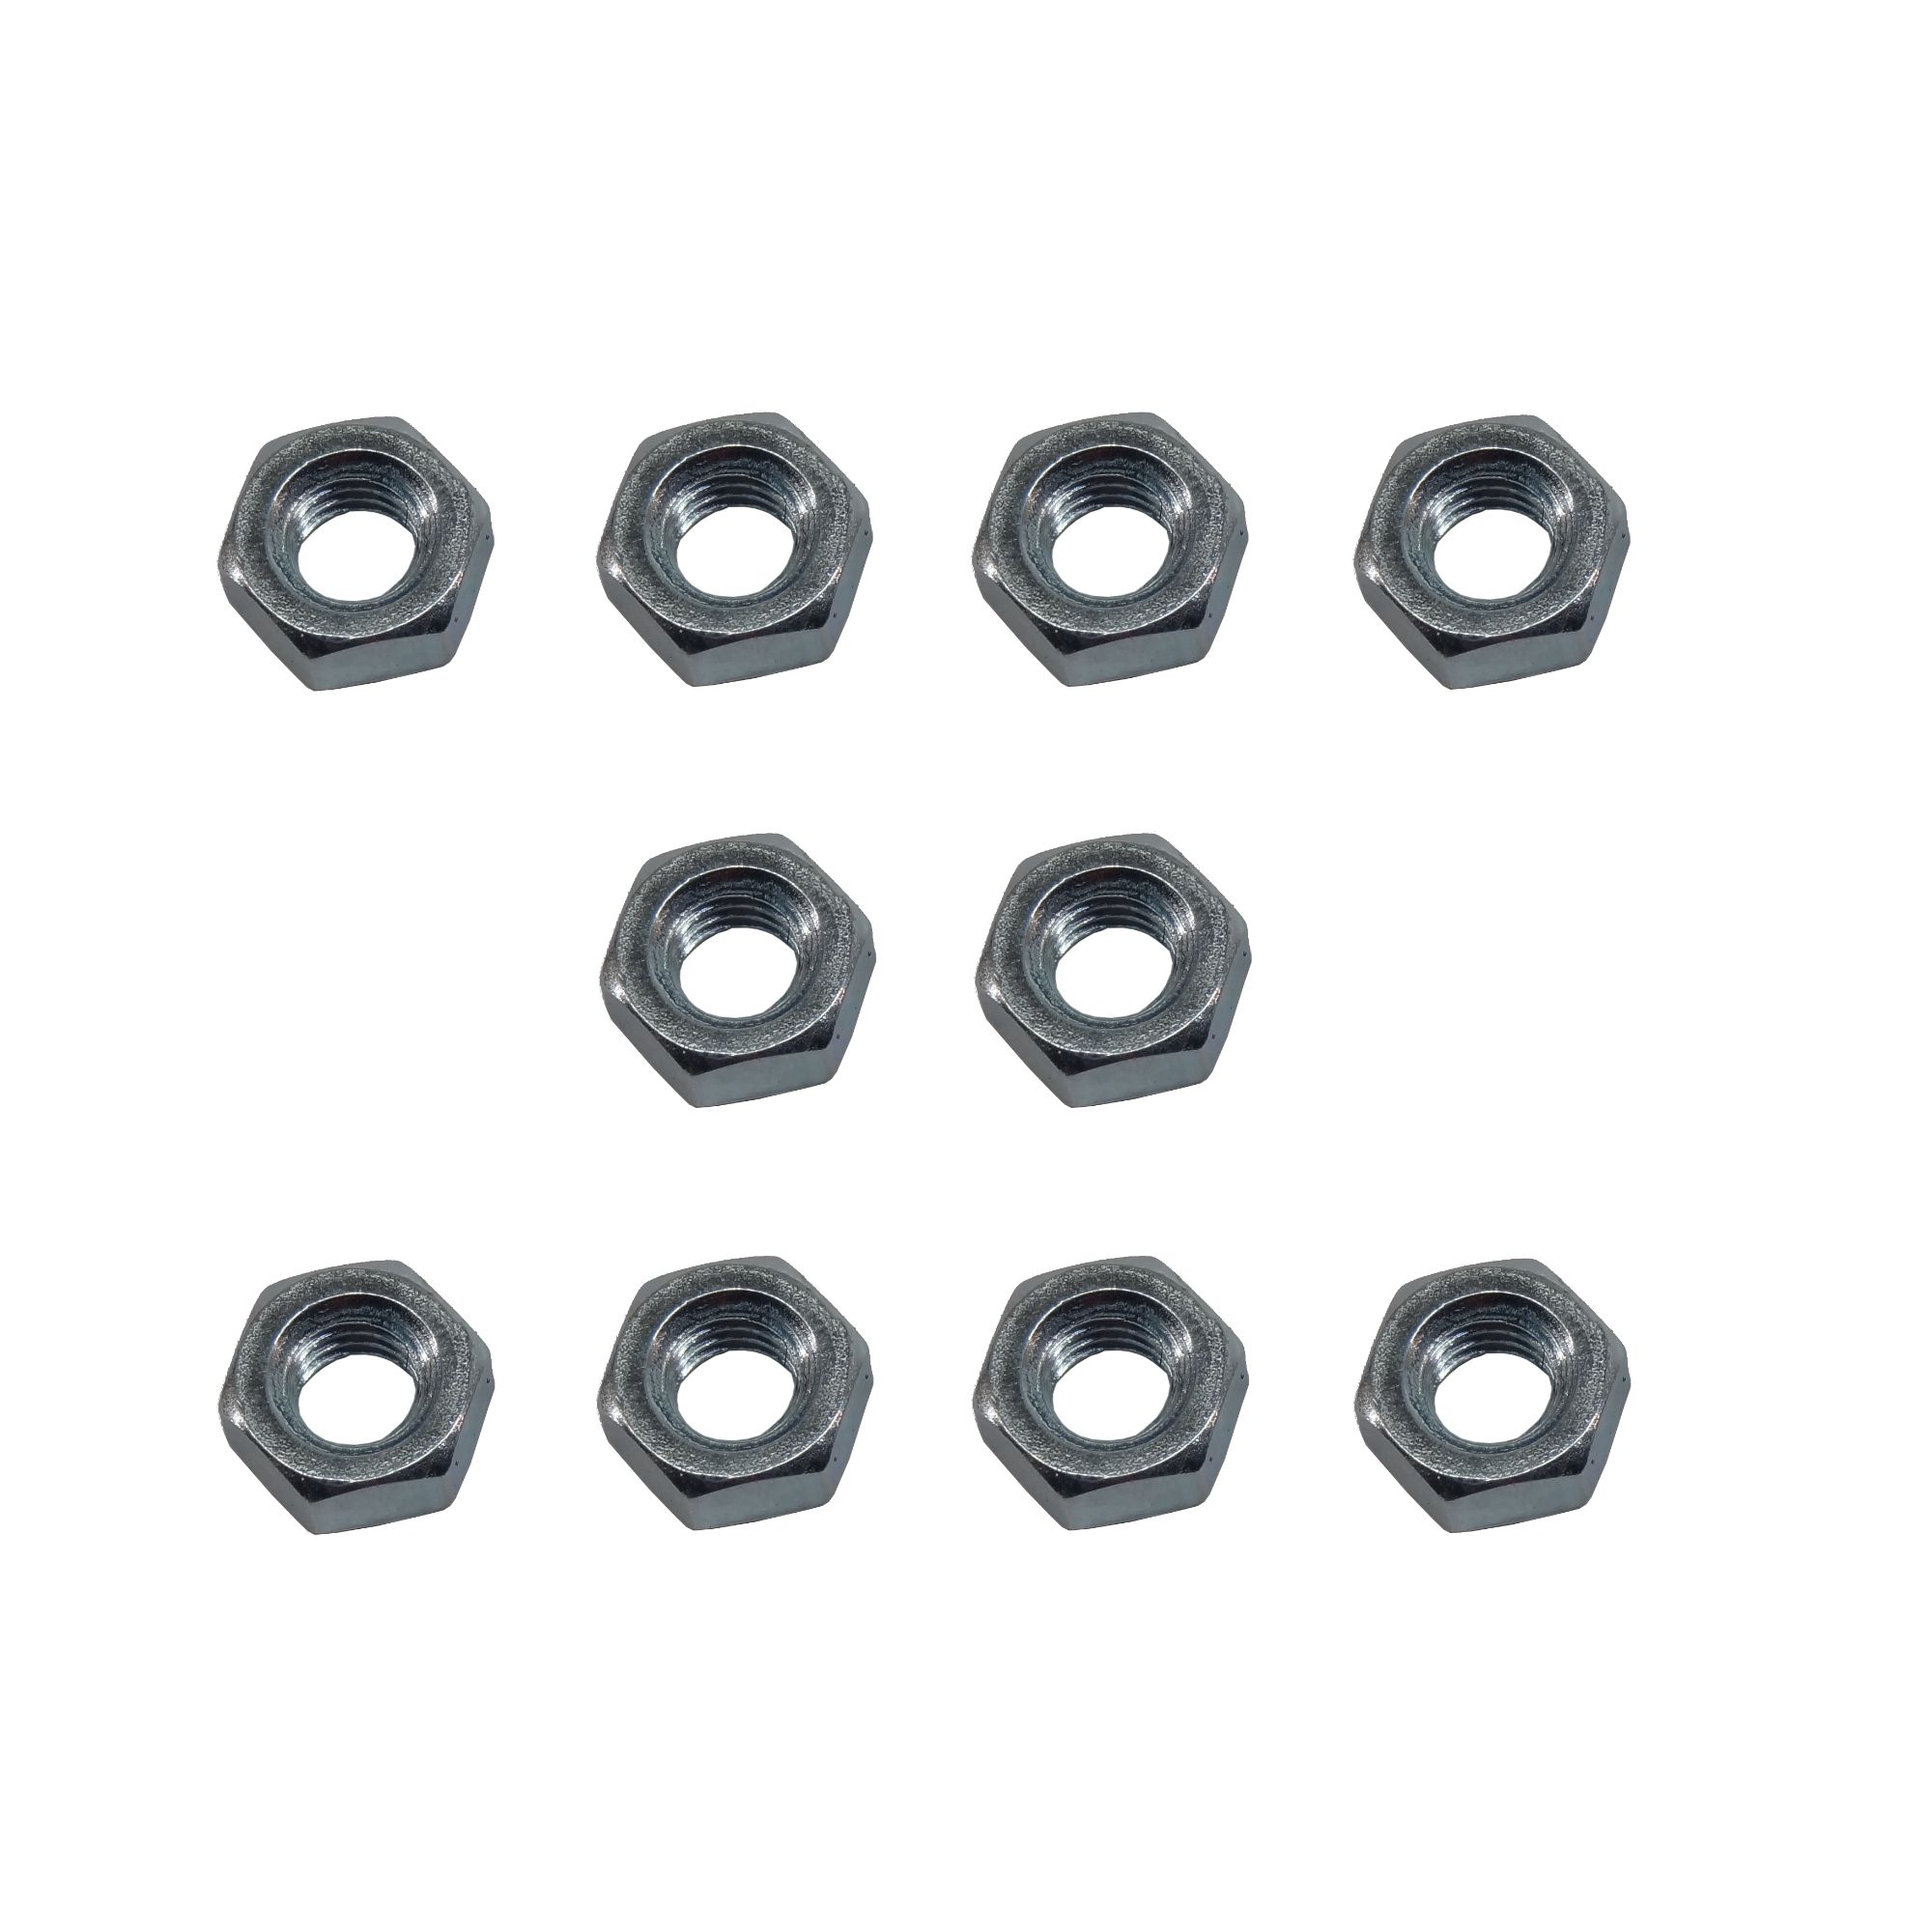 M10 (10mm) Hex Nuts 10 Pack